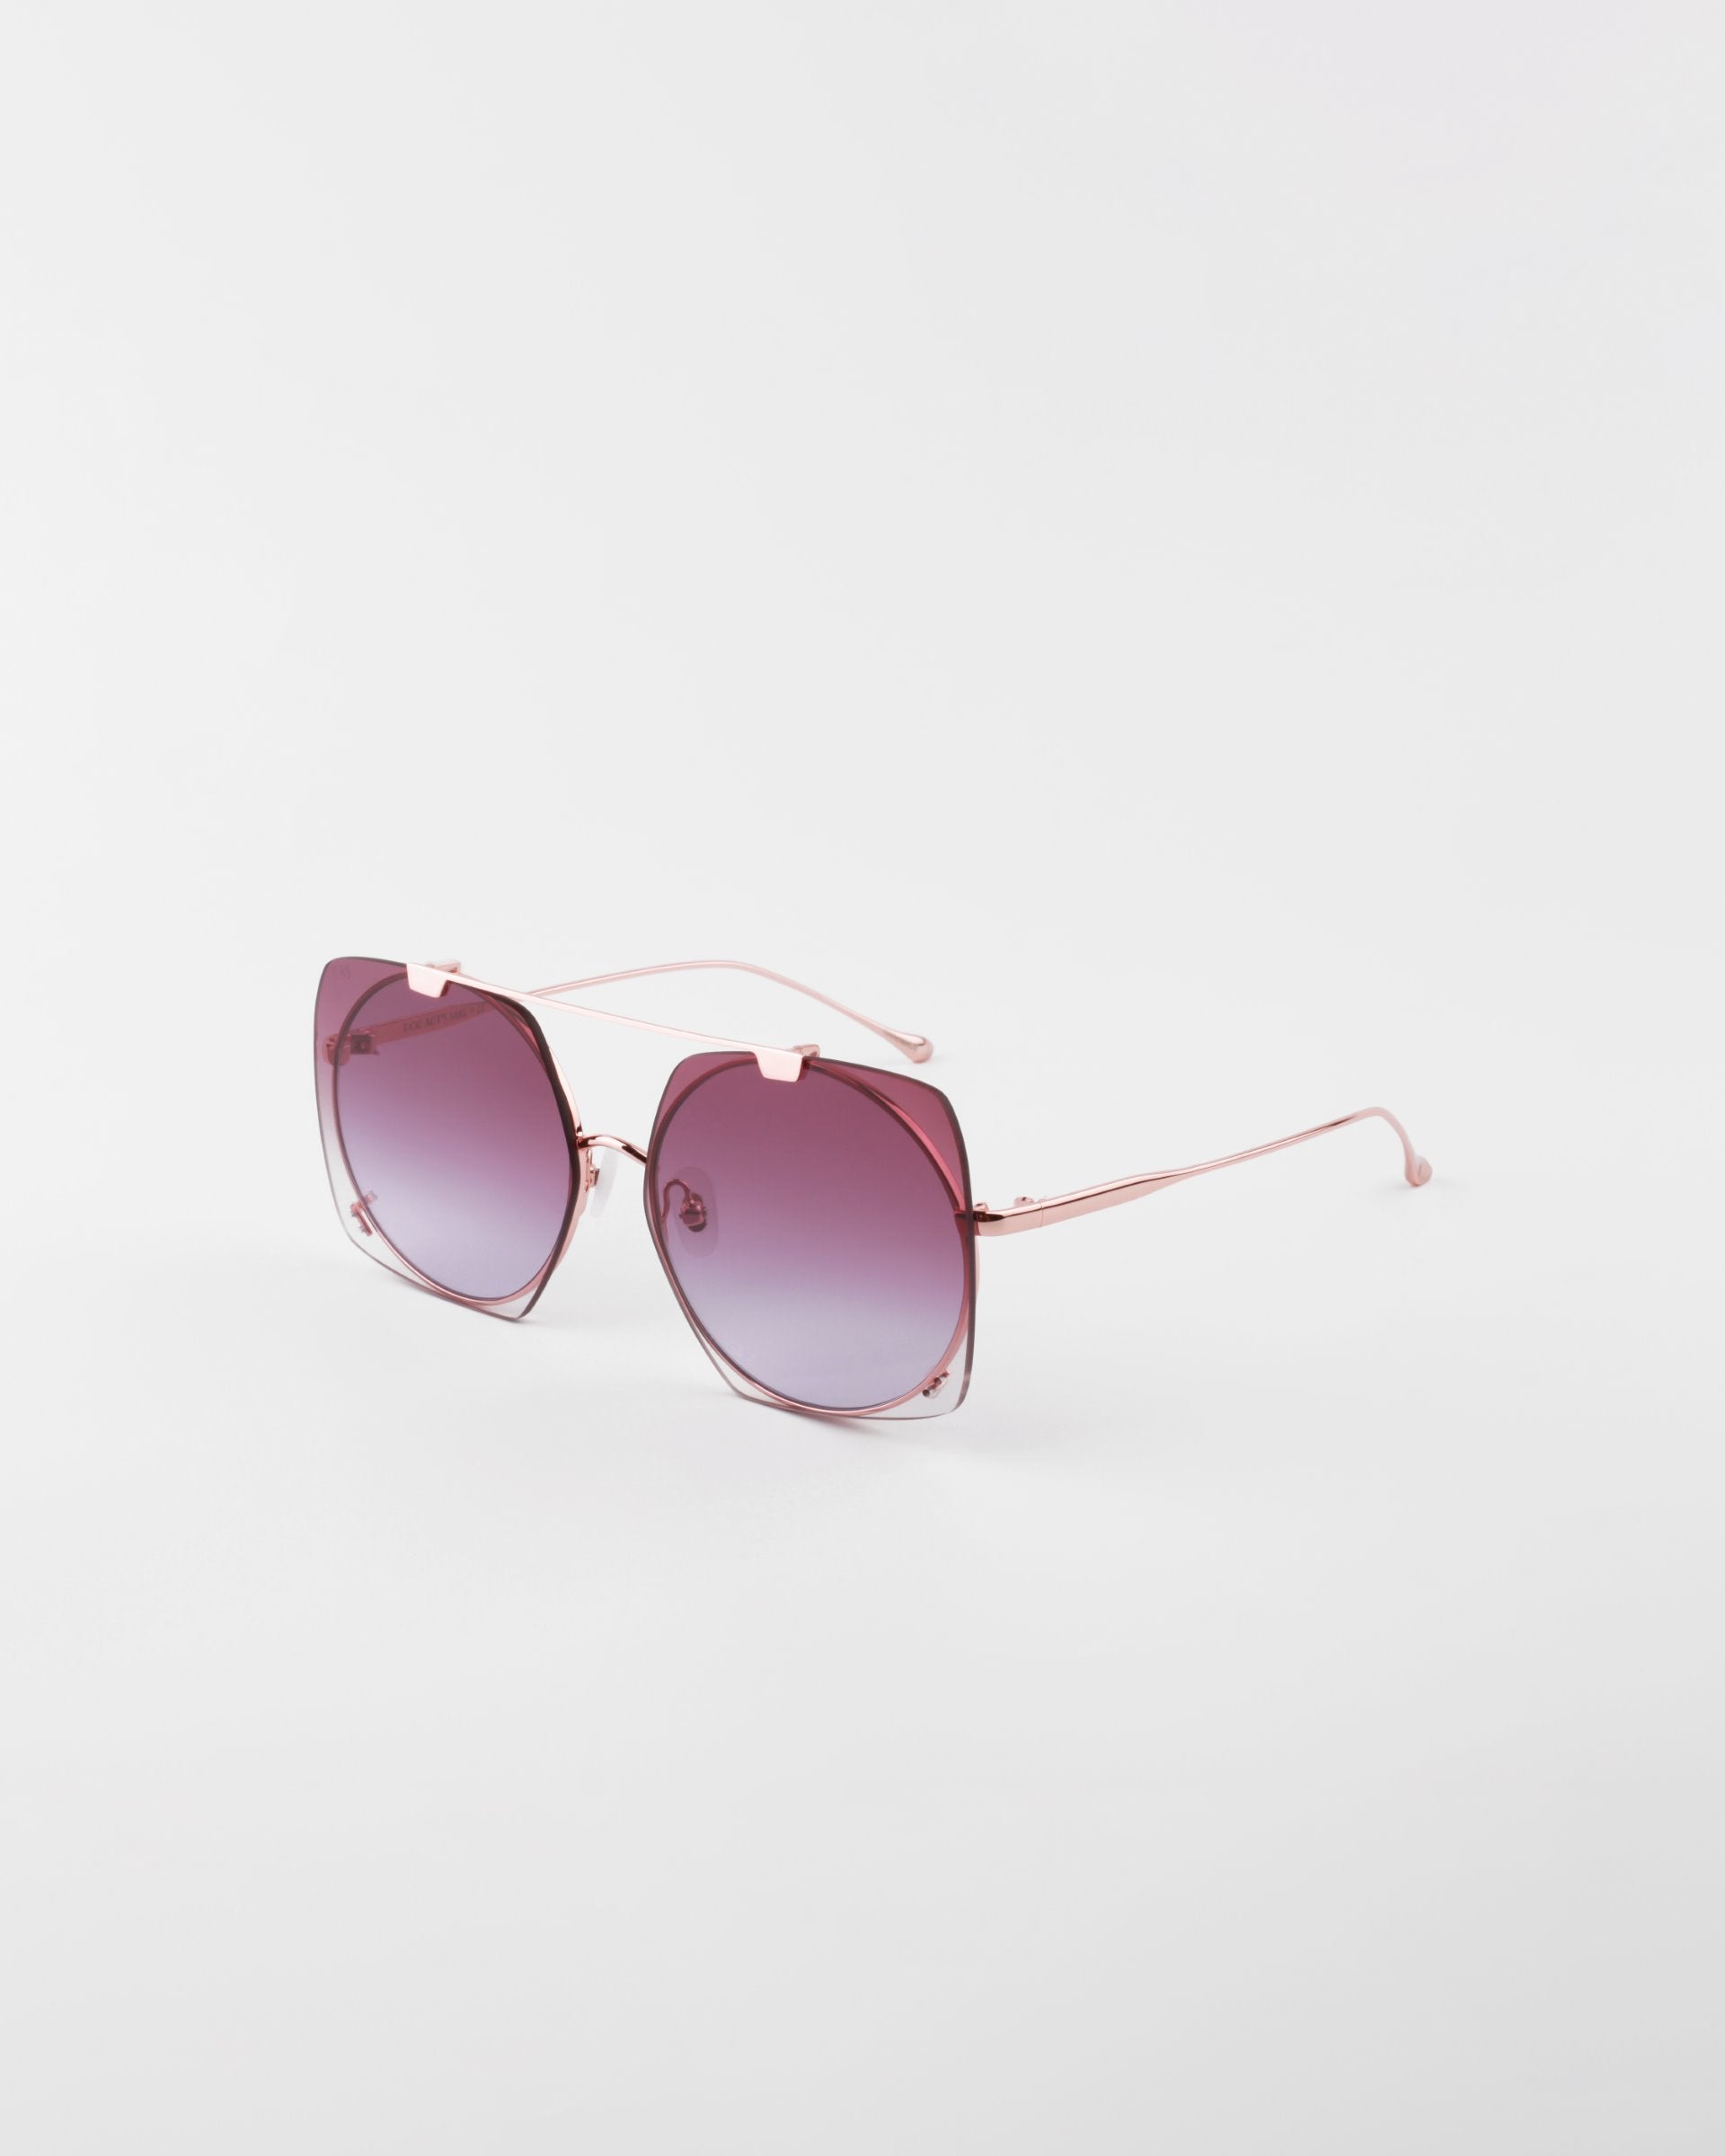 A pair of stylish Last Summer sunglasses by For Art&#39;s Sake® with rose-tinted lenses and thin, metallic pink frames, UVA &amp; UVB-protected. The sunglasses are positioned on a white surface, showcasing a gradient on the lenses from dark at the top to lighter at the bottom.